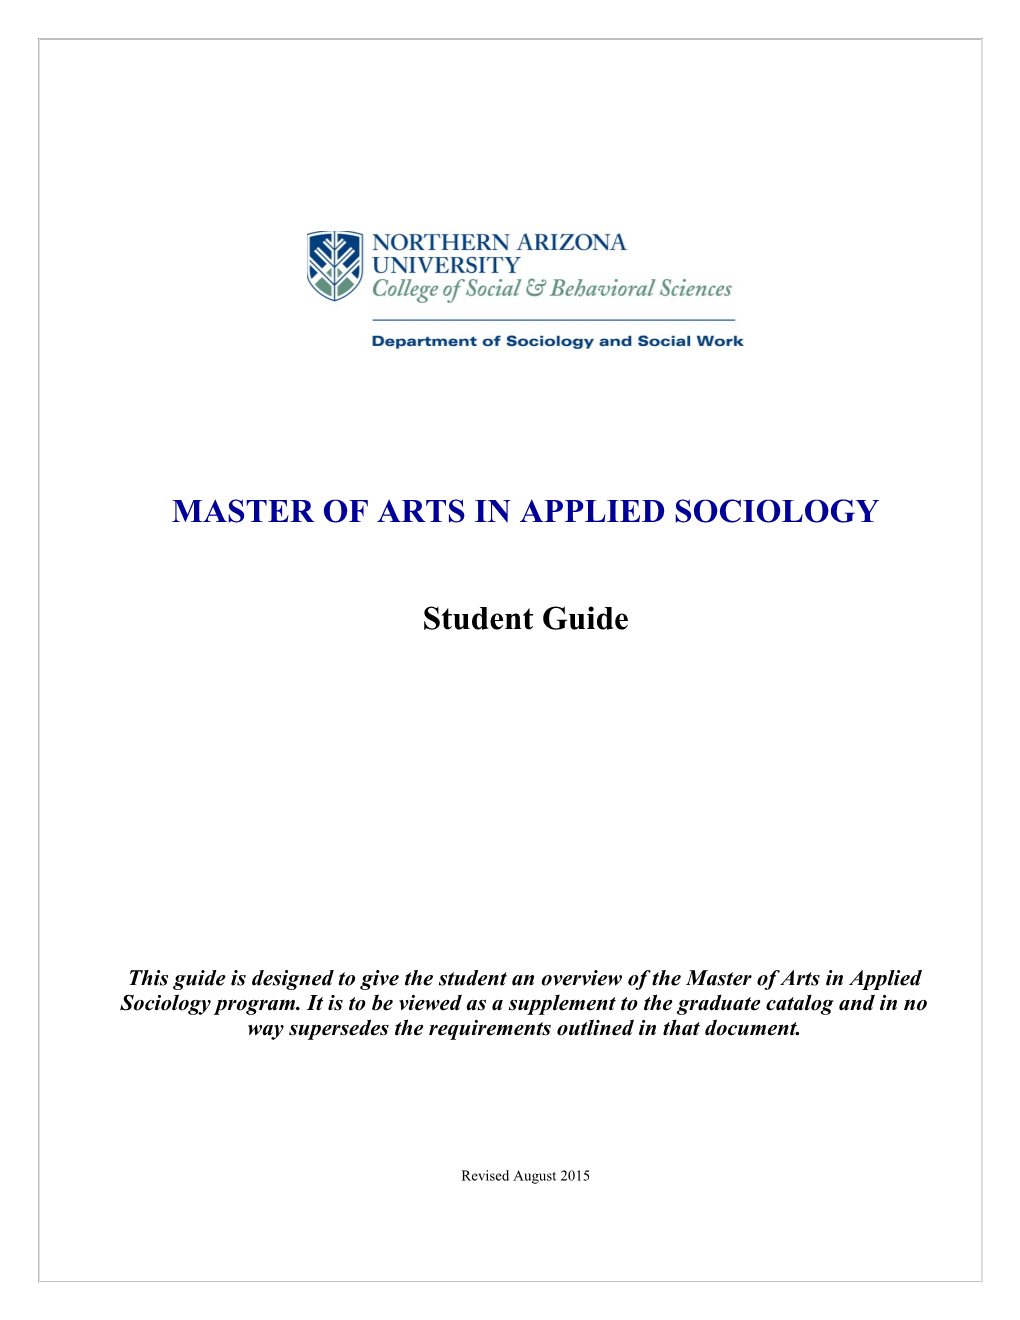 Master of Arts in Applied Sociology